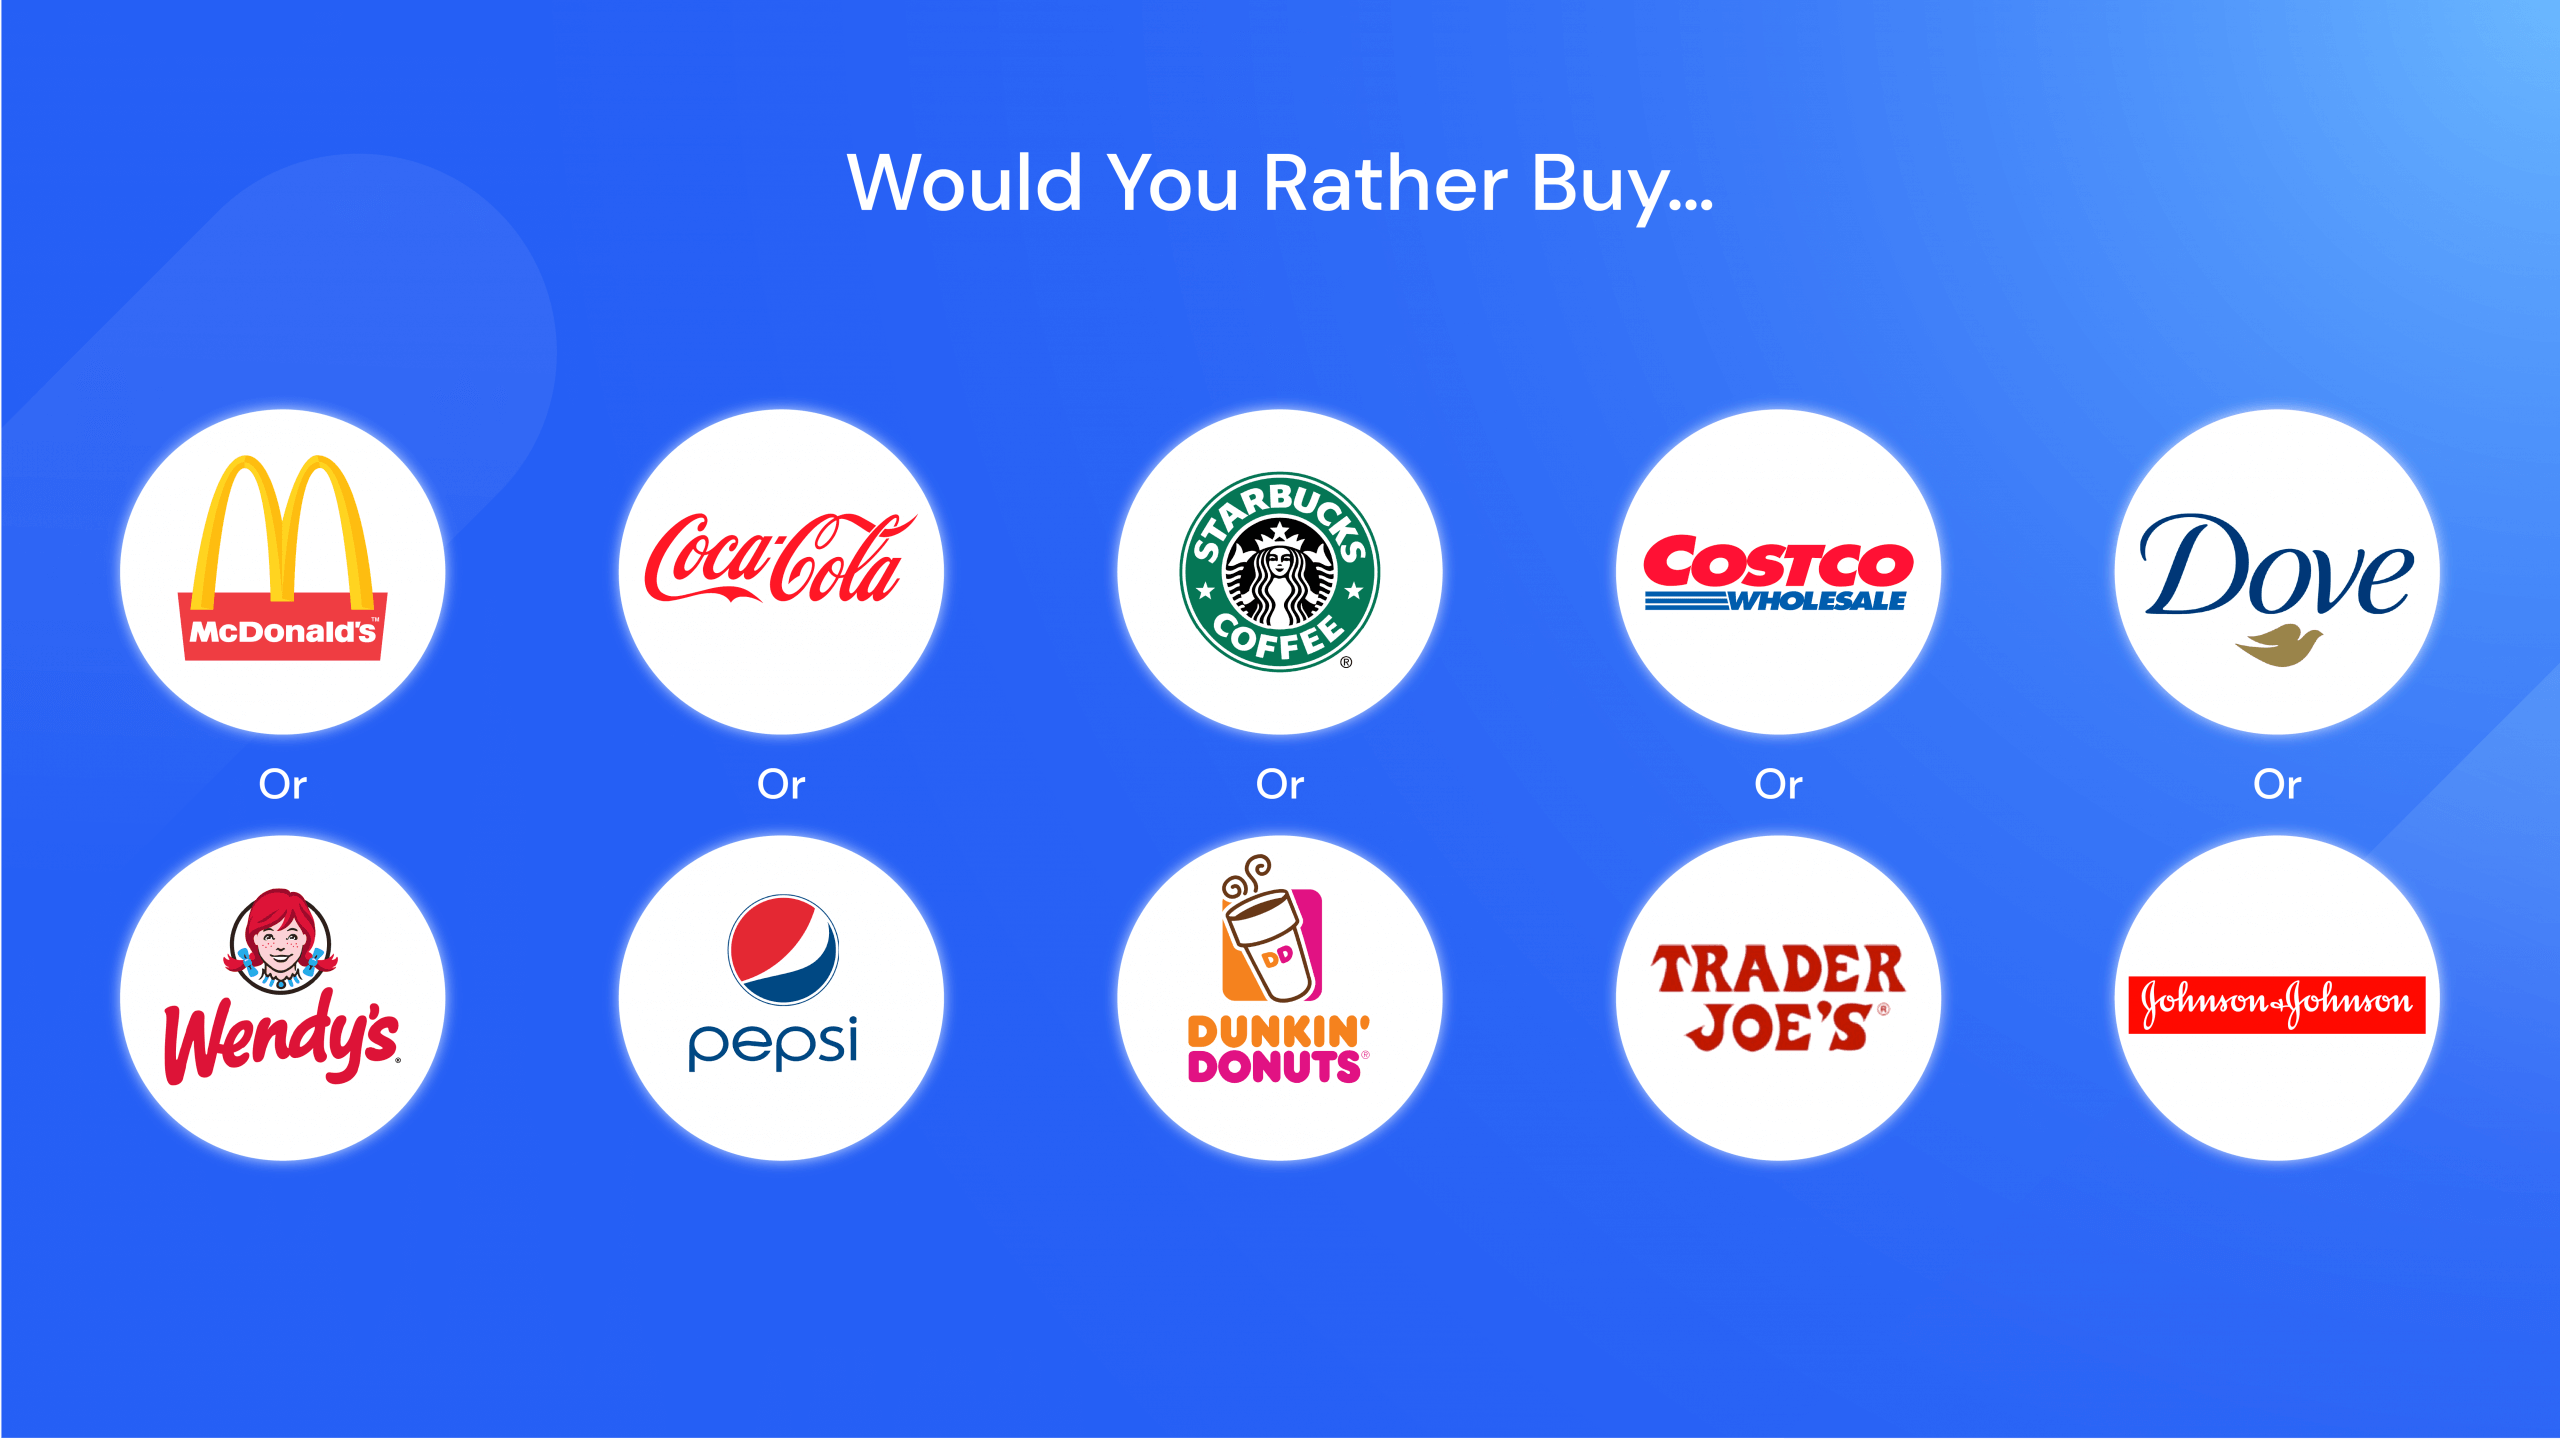 Some of the most loved brands face off, proving consumer trust is related to familiarity.